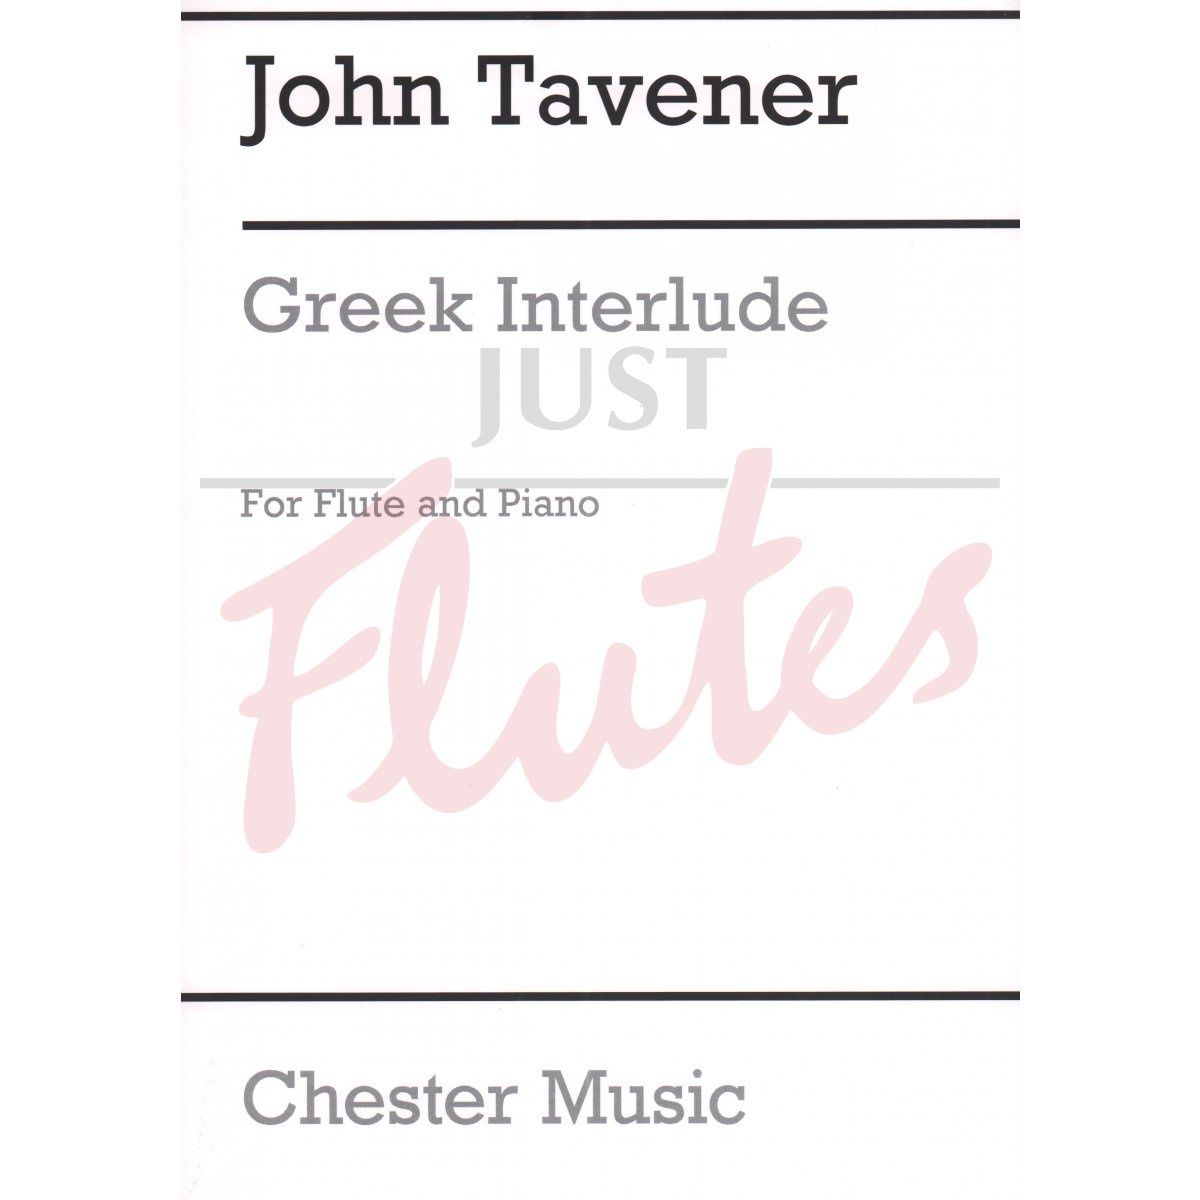 Greek Interlude for Flute and Piano